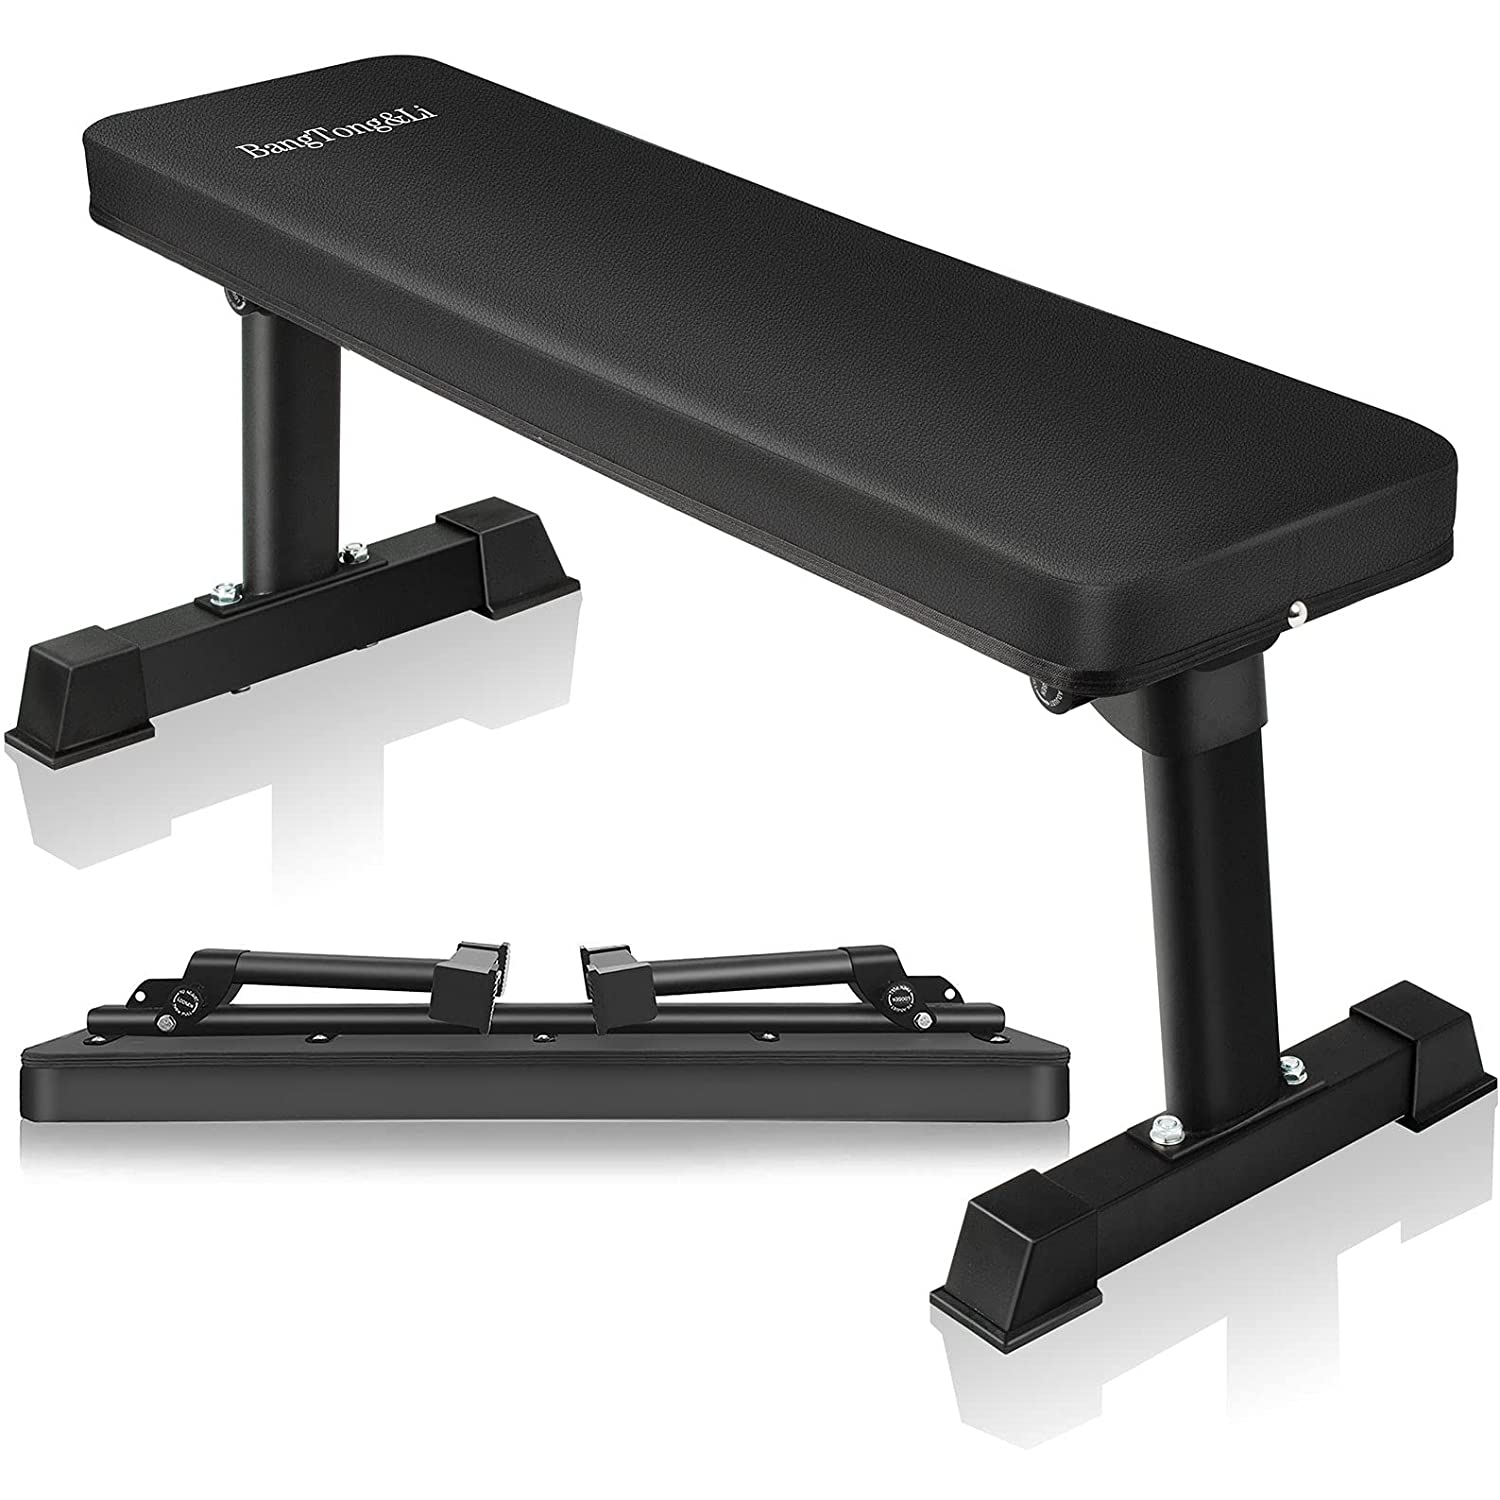 BangTong&Li Adjustable Bench,Utility Weight Bench for Full Body Workout- Multi-Purpose Foldable